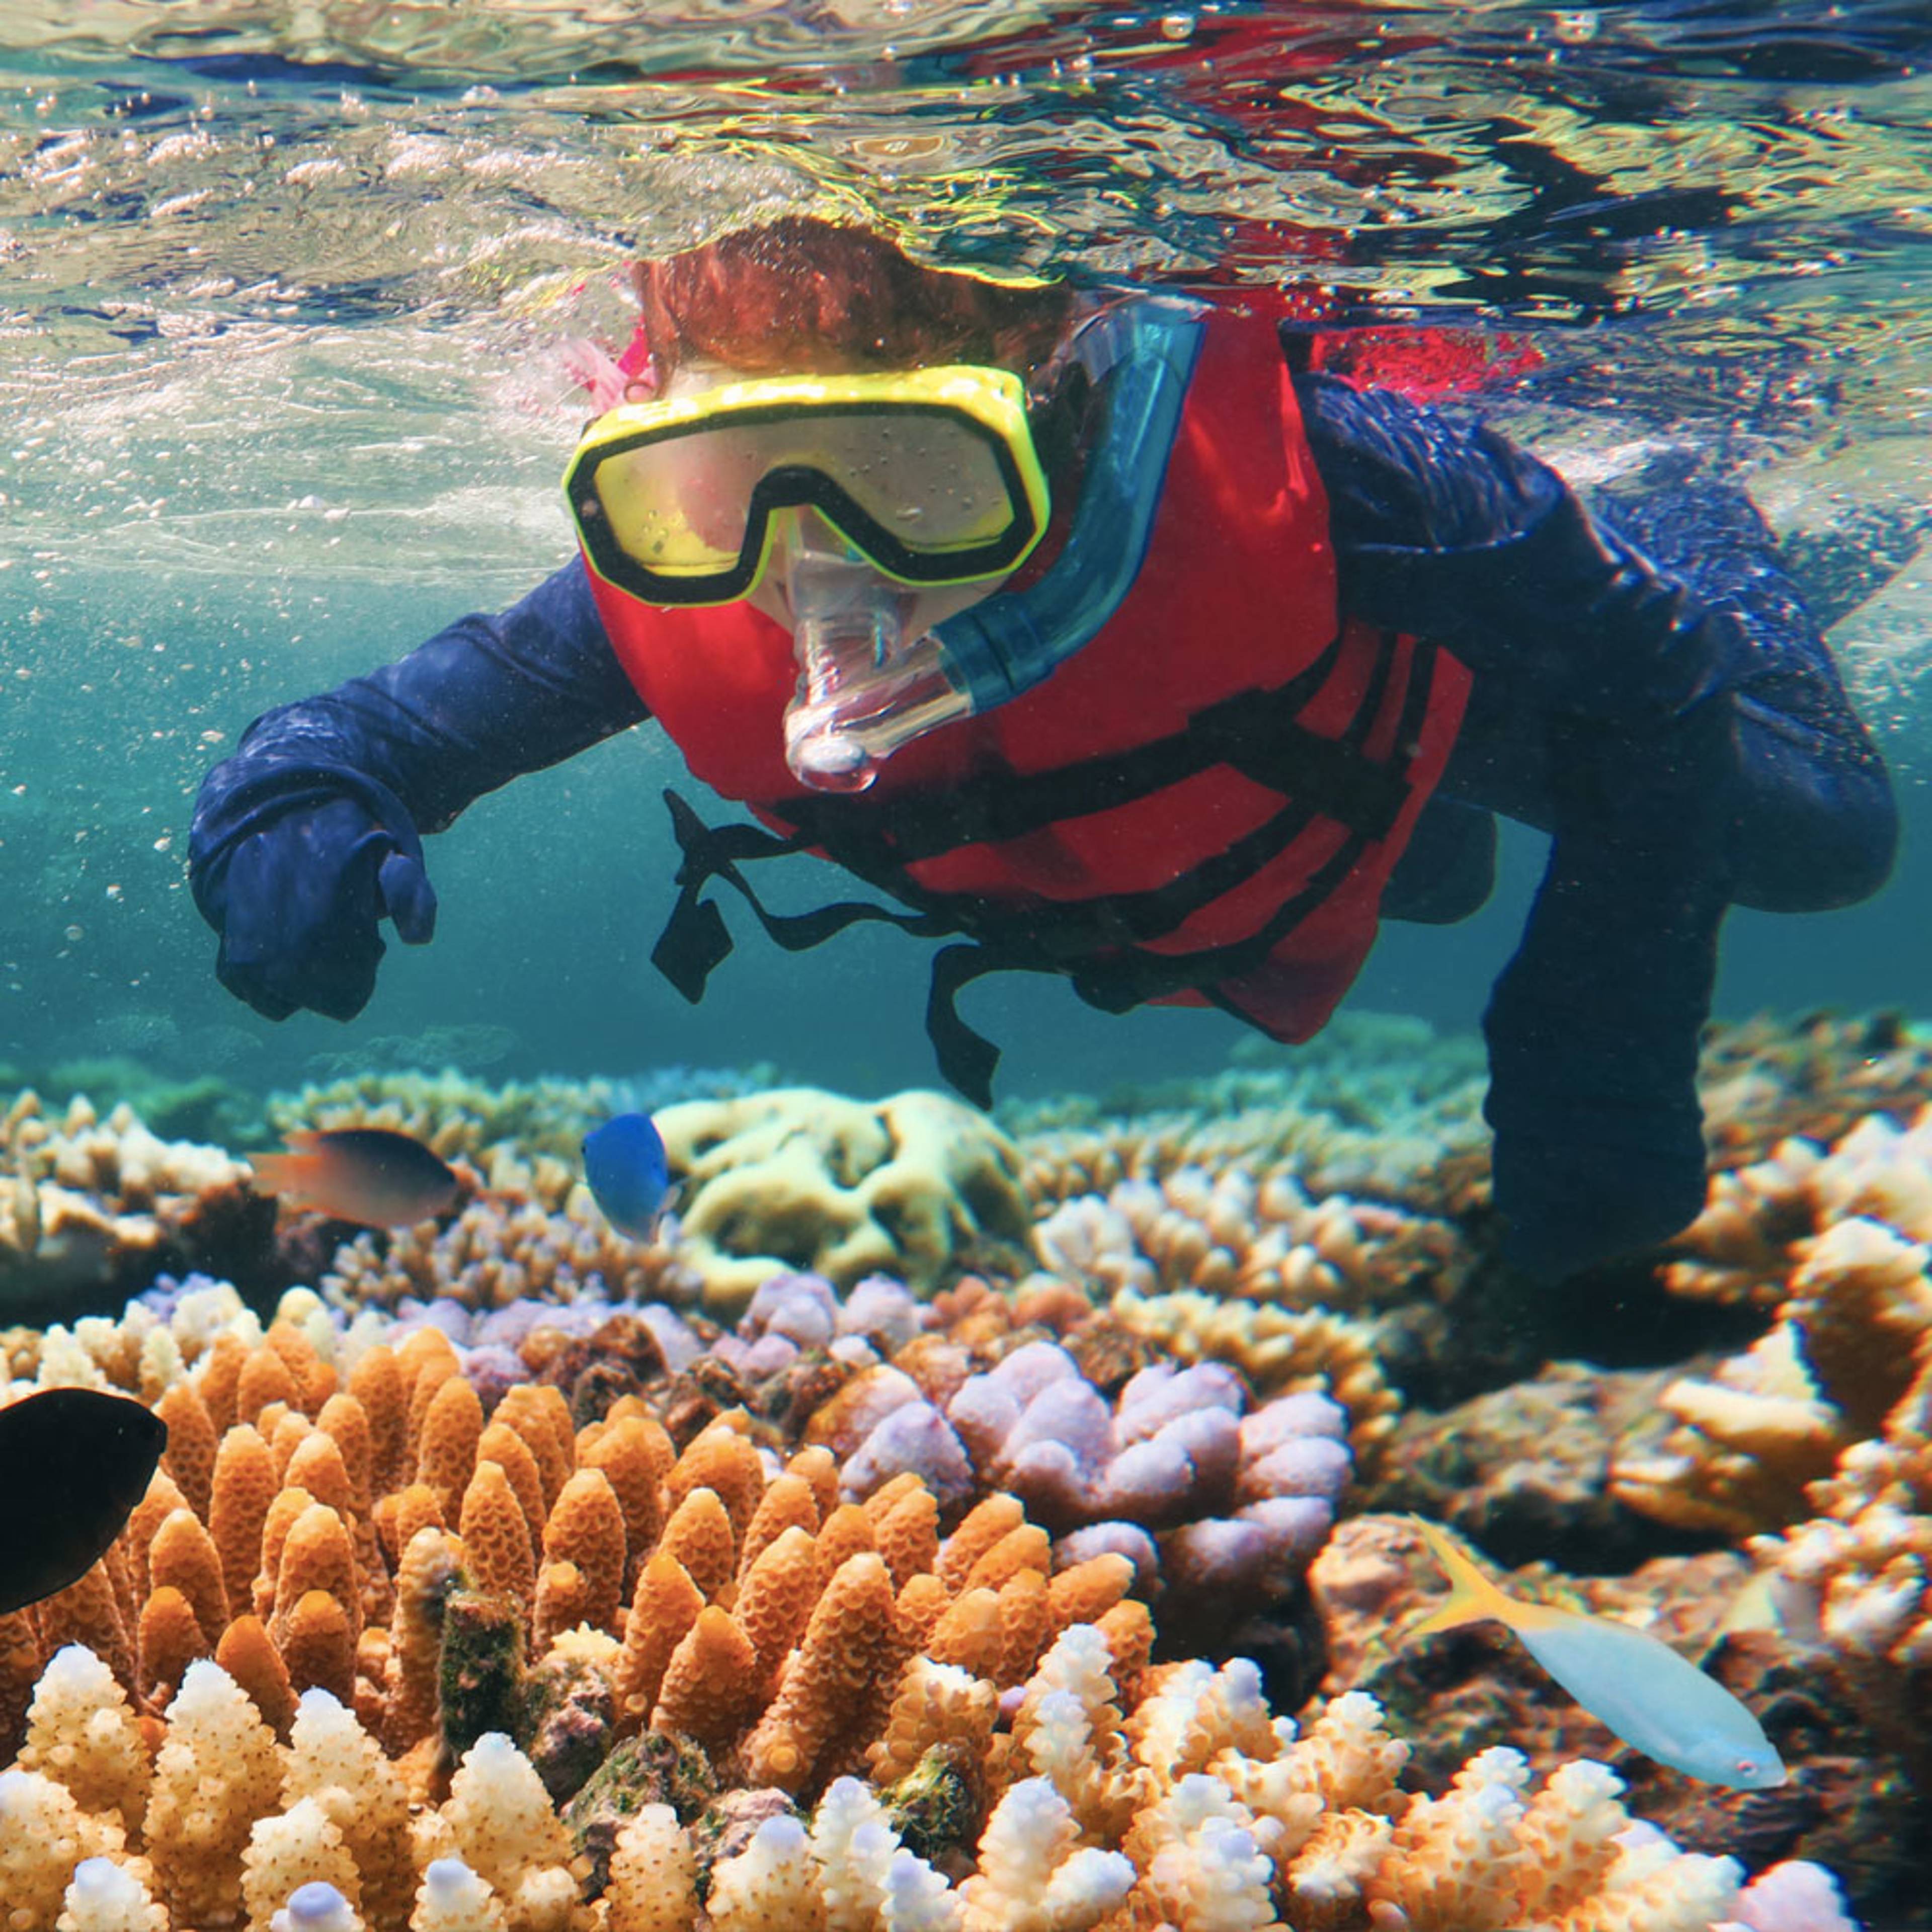 Experience diving in Australia with a hand-picked local expert